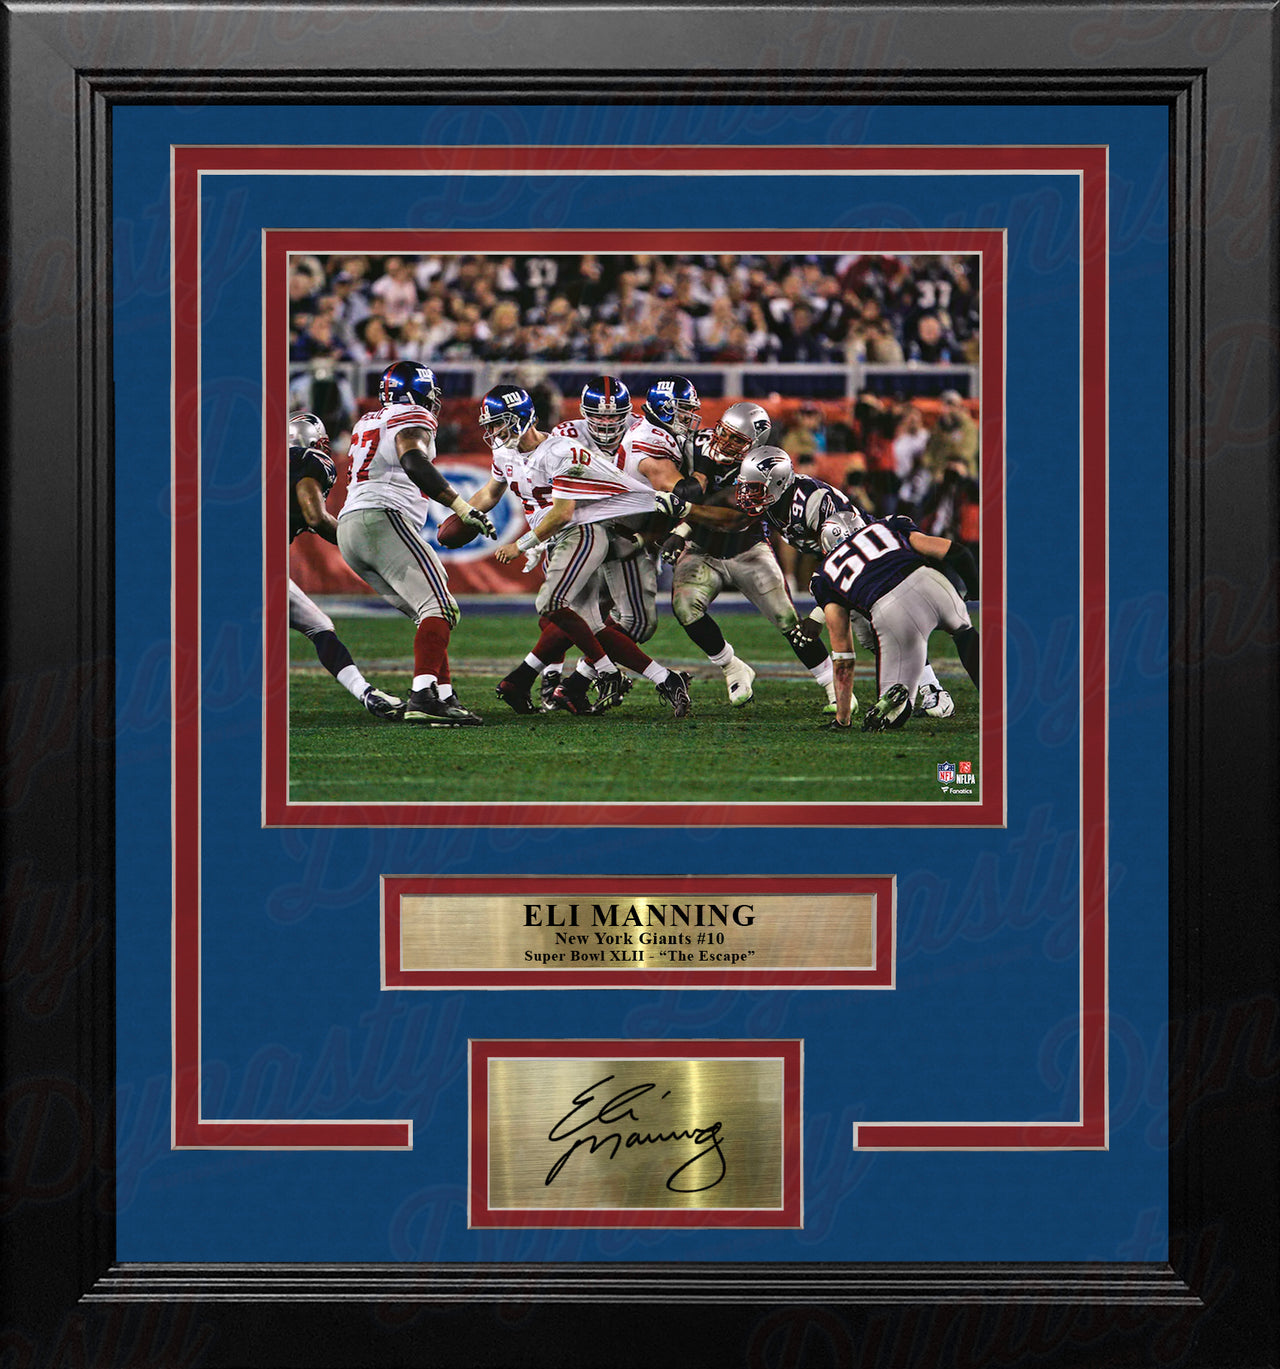 Eli Manning Super Bowl XLII Sack Escape New York Giants 8x10 Framed Photo with Engraved Autograph - Dynasty Sports & Framing 